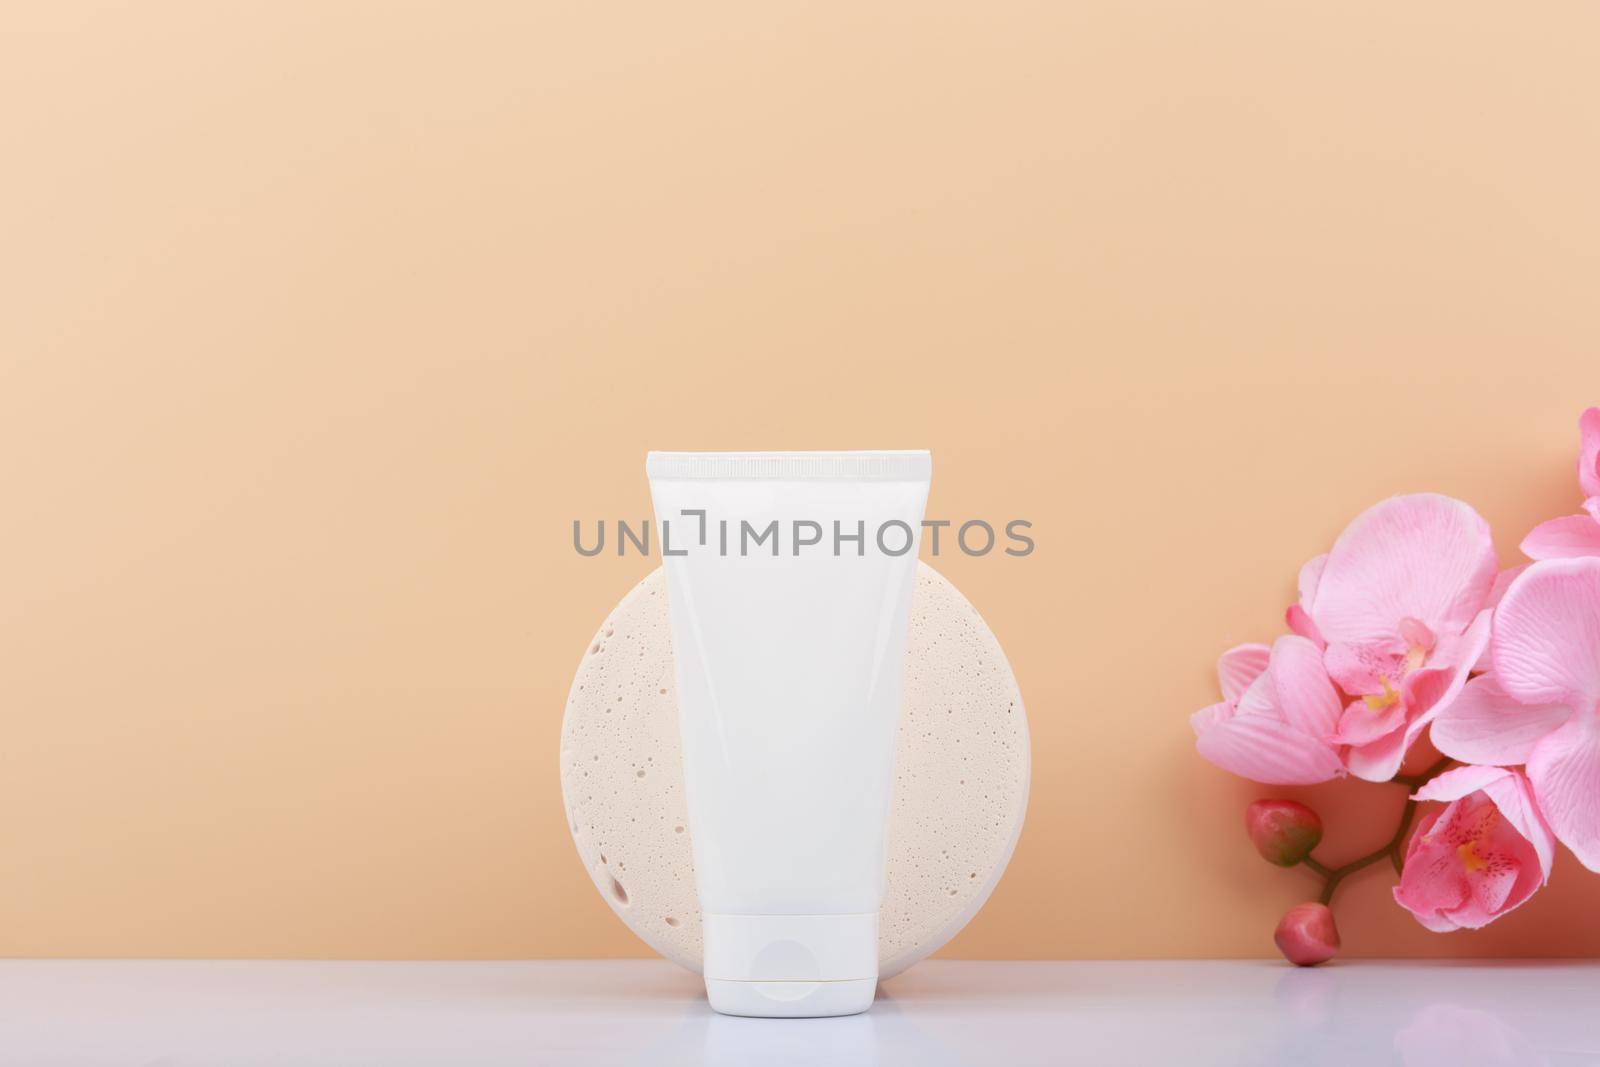 White plastic cosmetic tube with cream, balm, mask, scrub or lotion on beige background decorated with pink flower with copy space. Concept of natural organic skin care products for manicure, hands or face